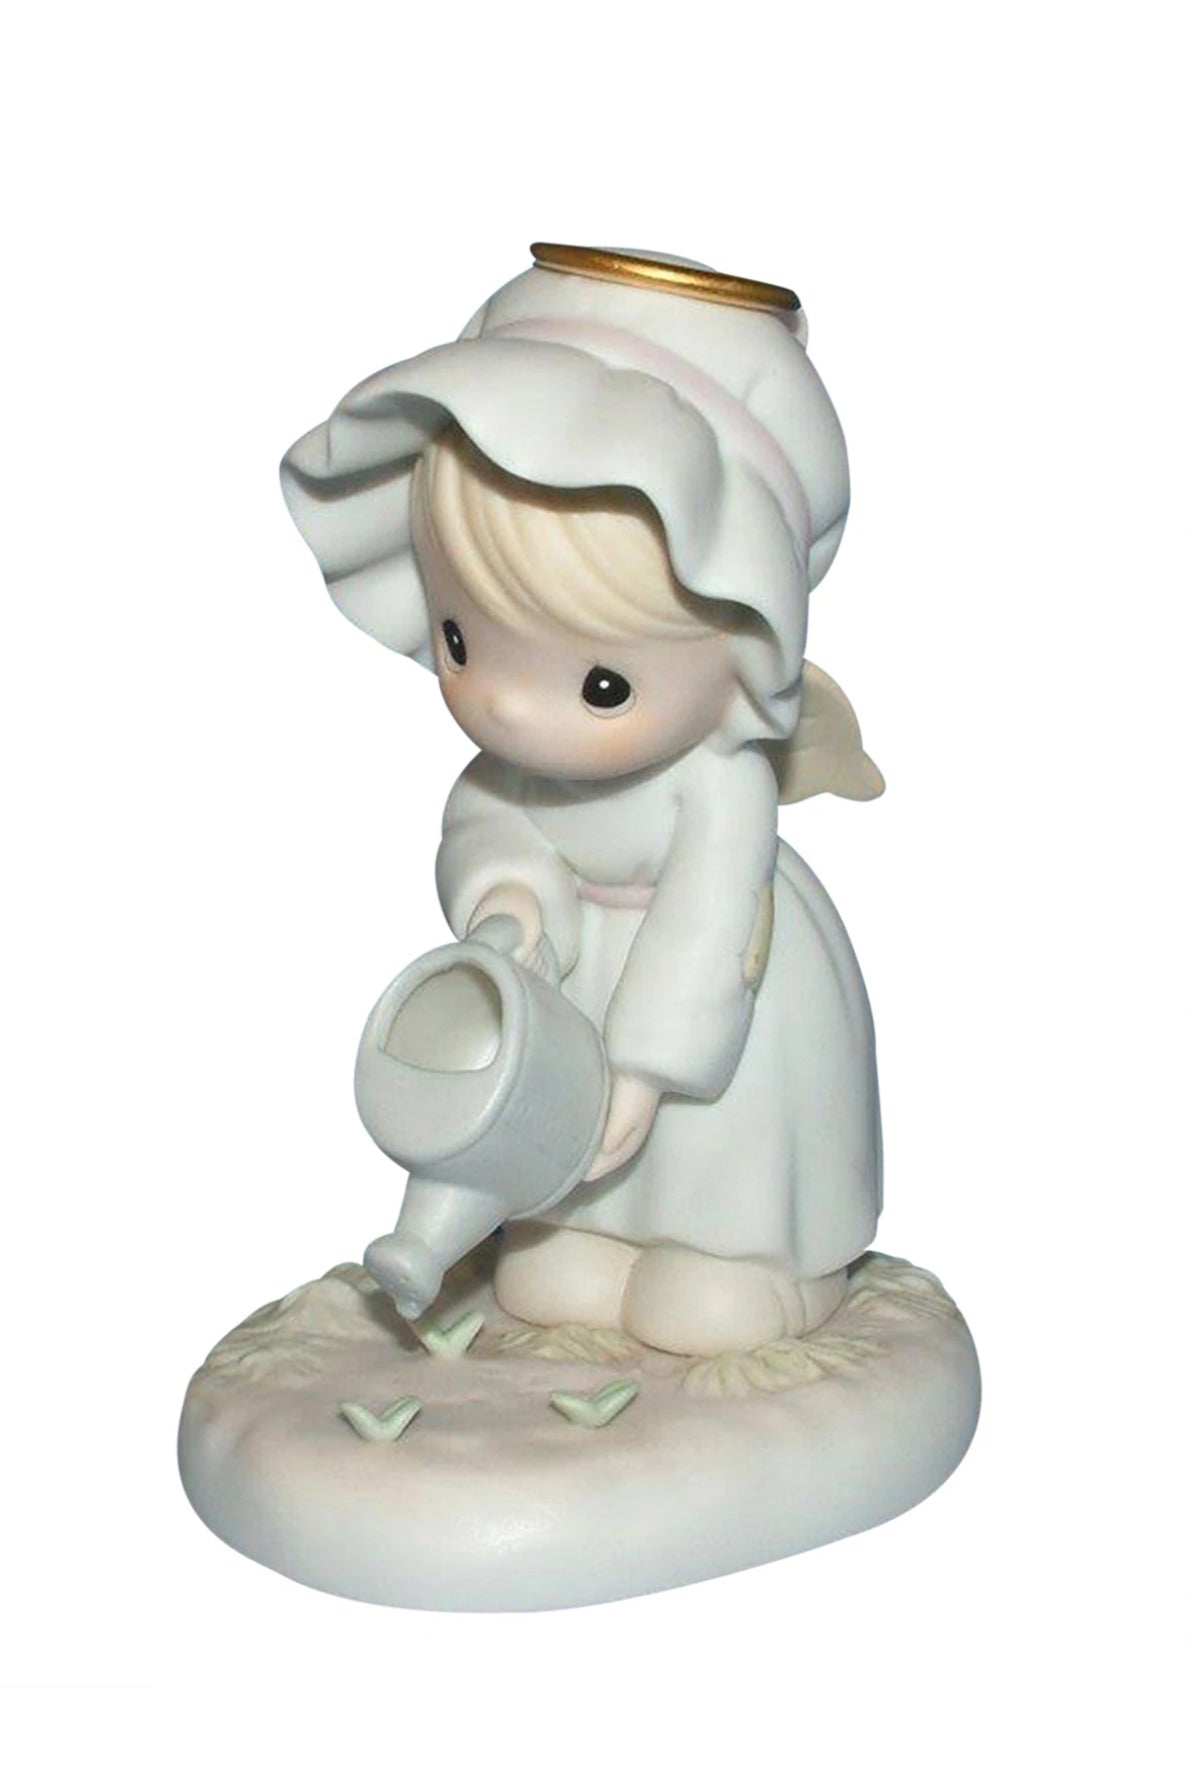 Some Plant, Some Water, But God Giveth The Increase - Precious Moment Figurine